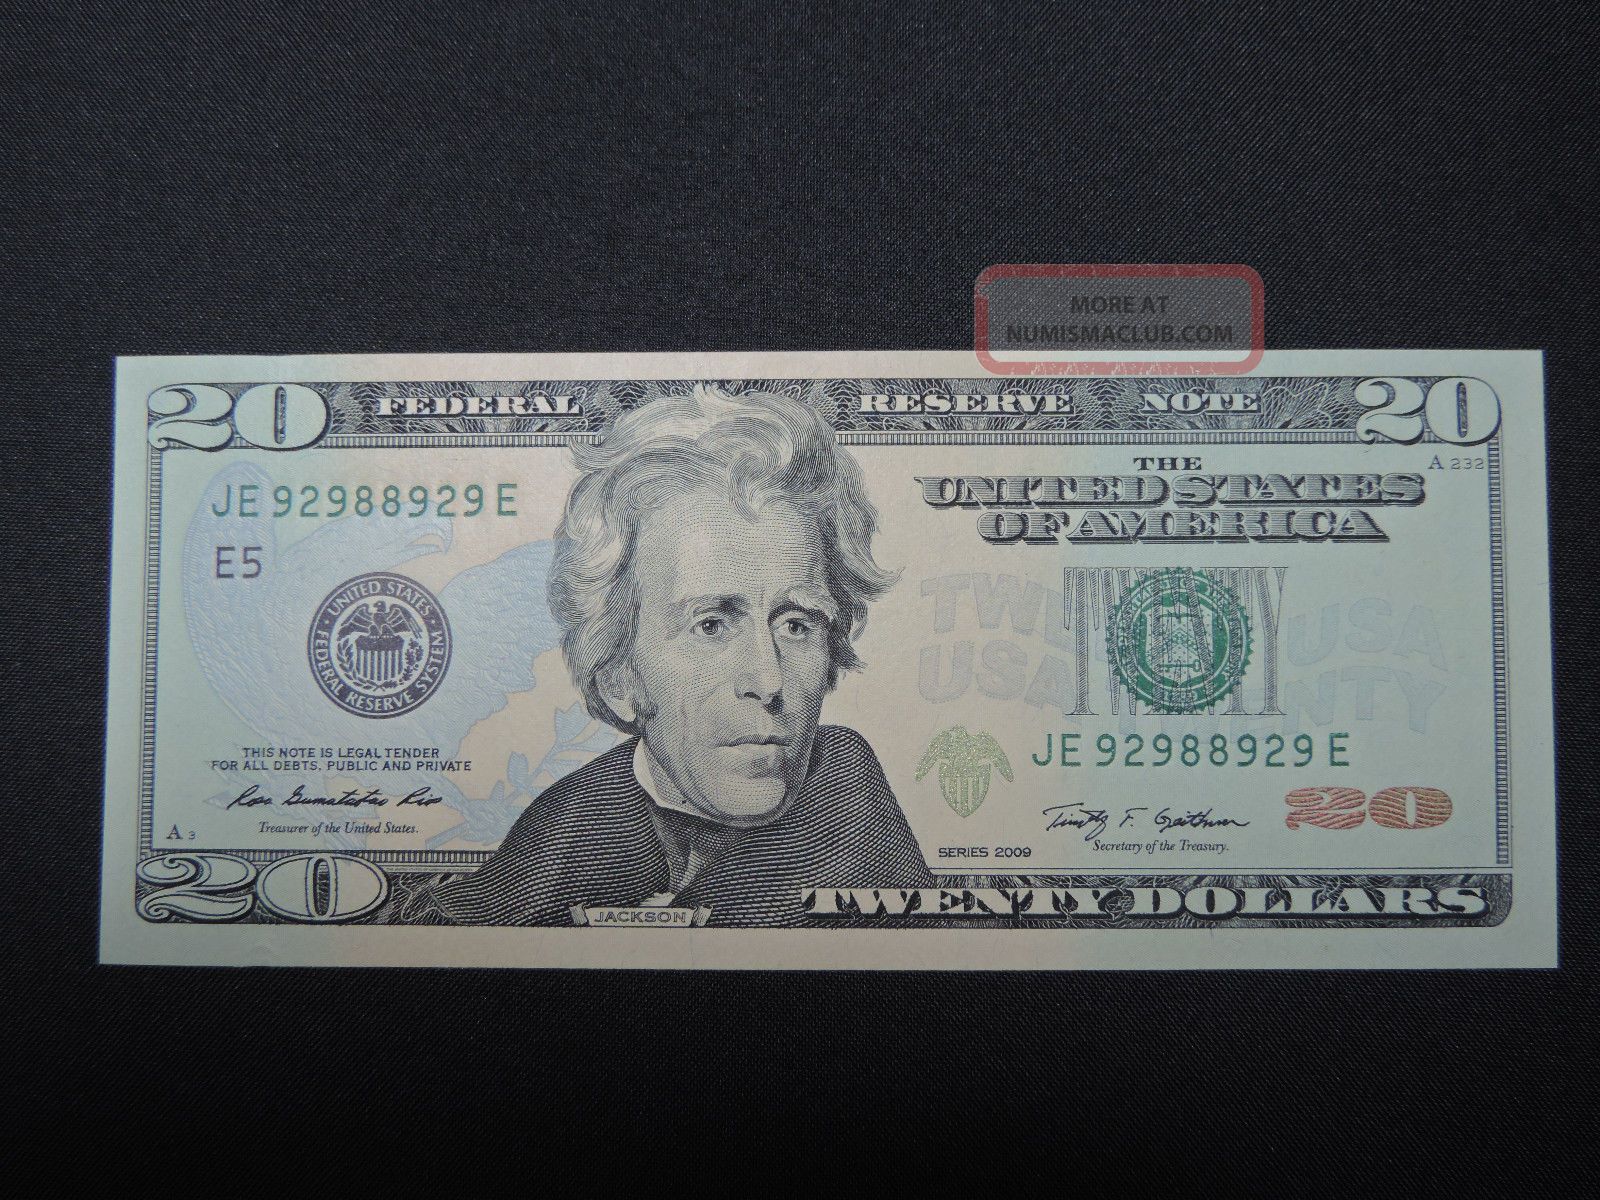 2009 $20 Us Dollar Bank Note Je 92988929 E Radar / 3 Digit Bookend Bill Usd Cu Small Size Notes photo